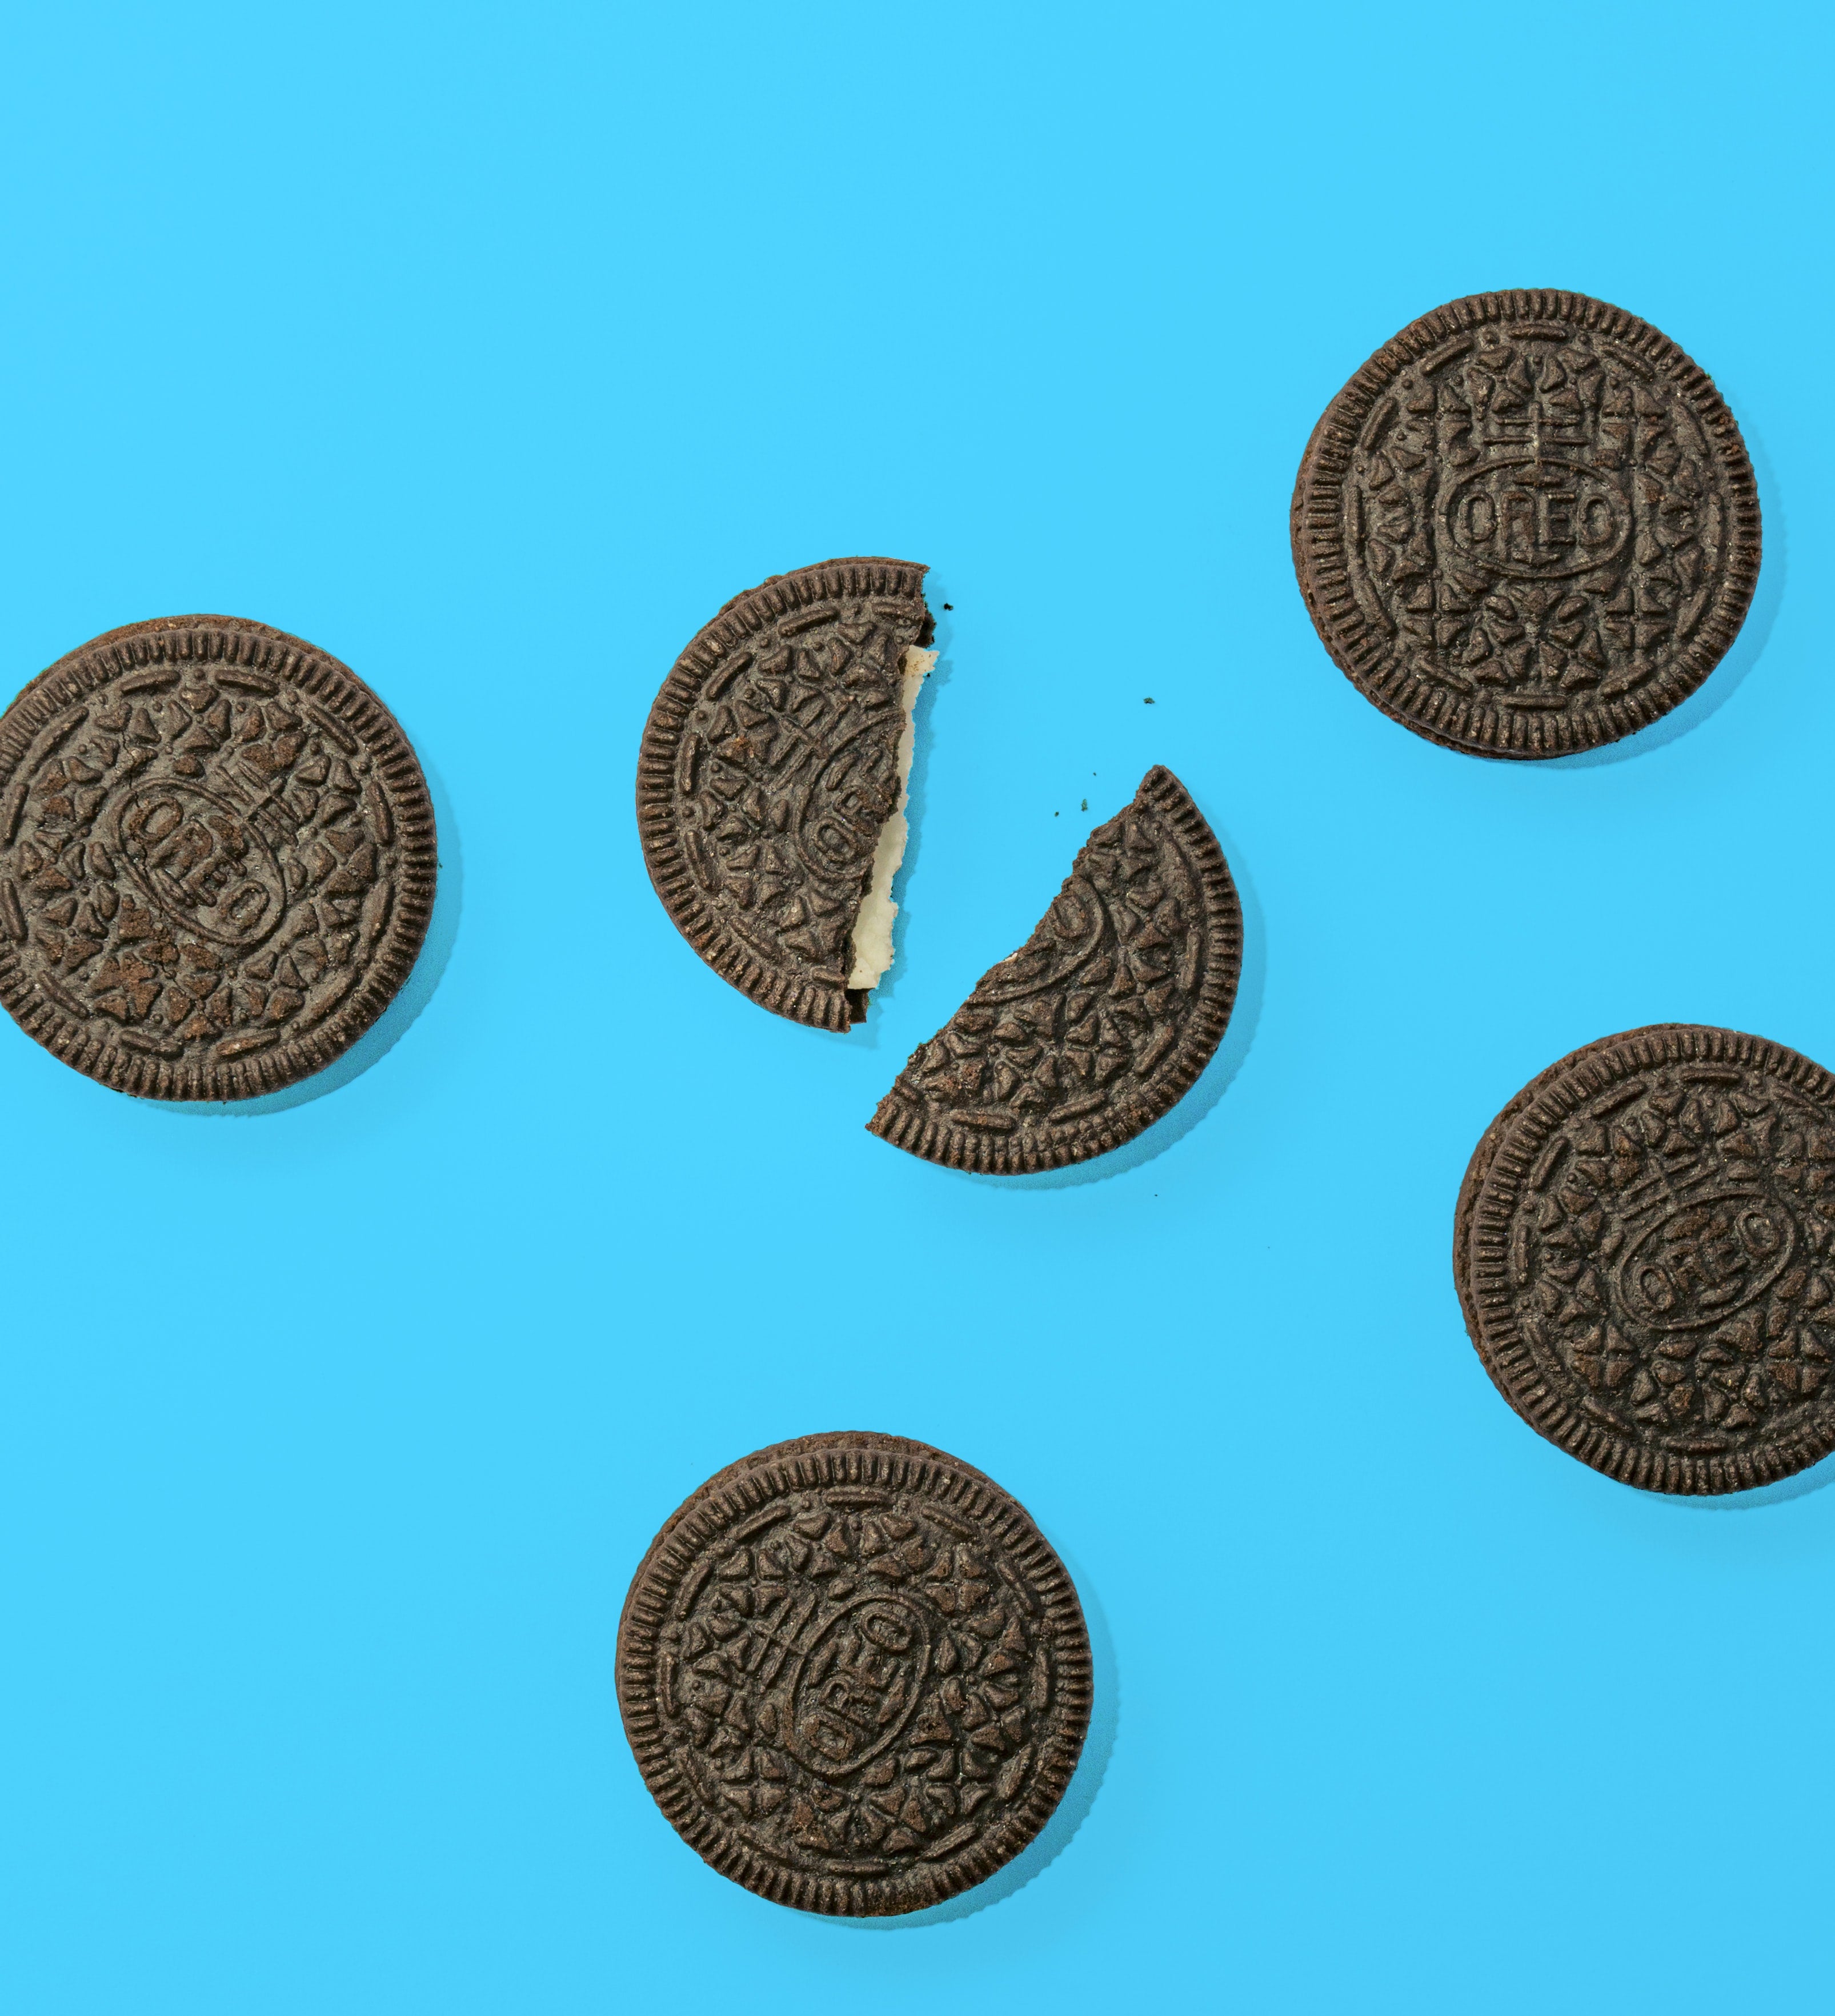 REQ Oreo Wins for Best Super Bowl Ad You Likely Didn't See